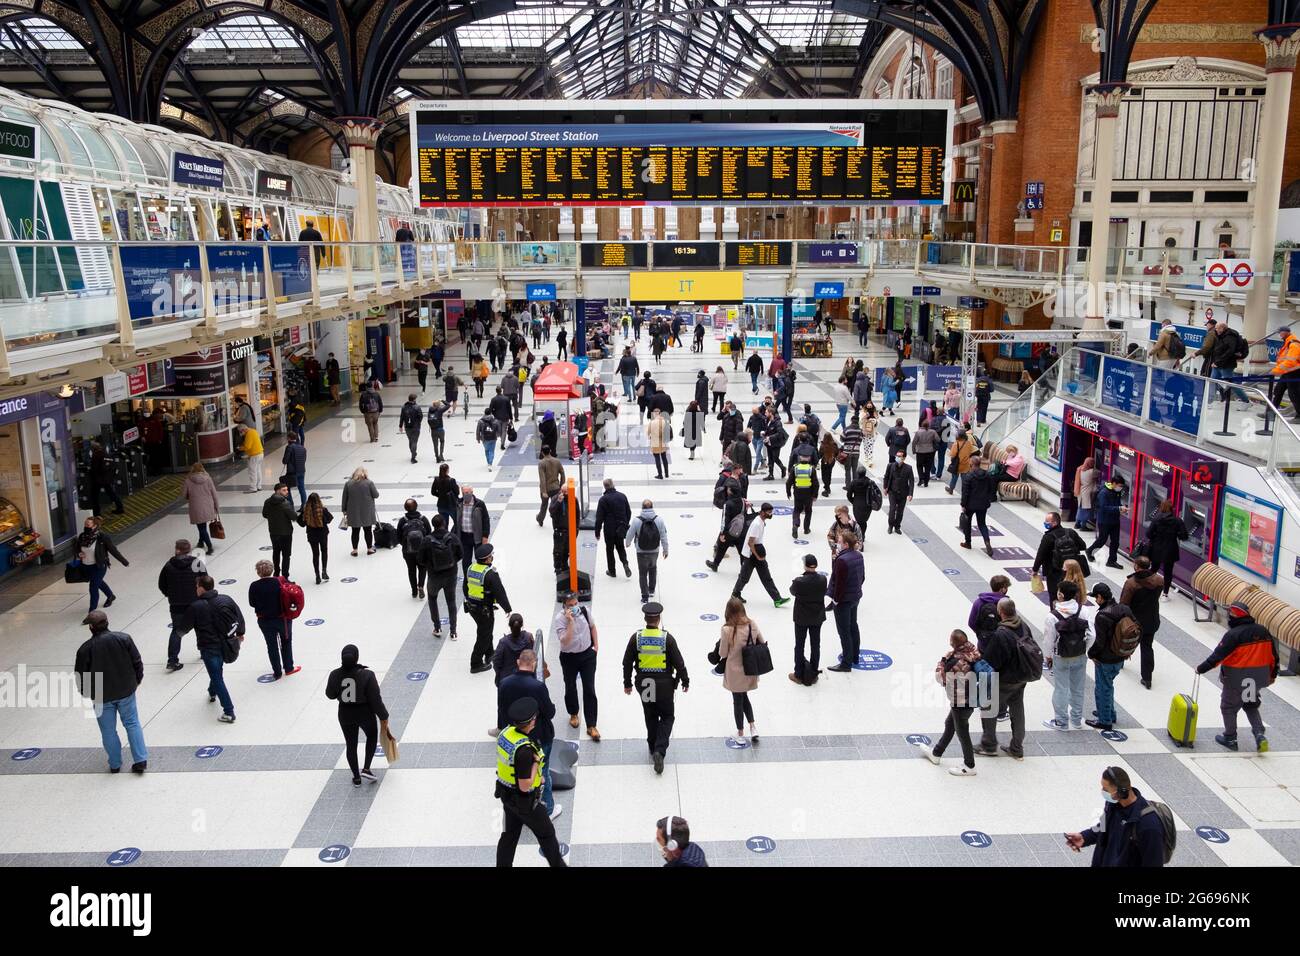 People passengers walking on the concourse and checking departure times at Liverpool Street Station during covid pandemic in London UK KATHY DEWITT Stock Photo